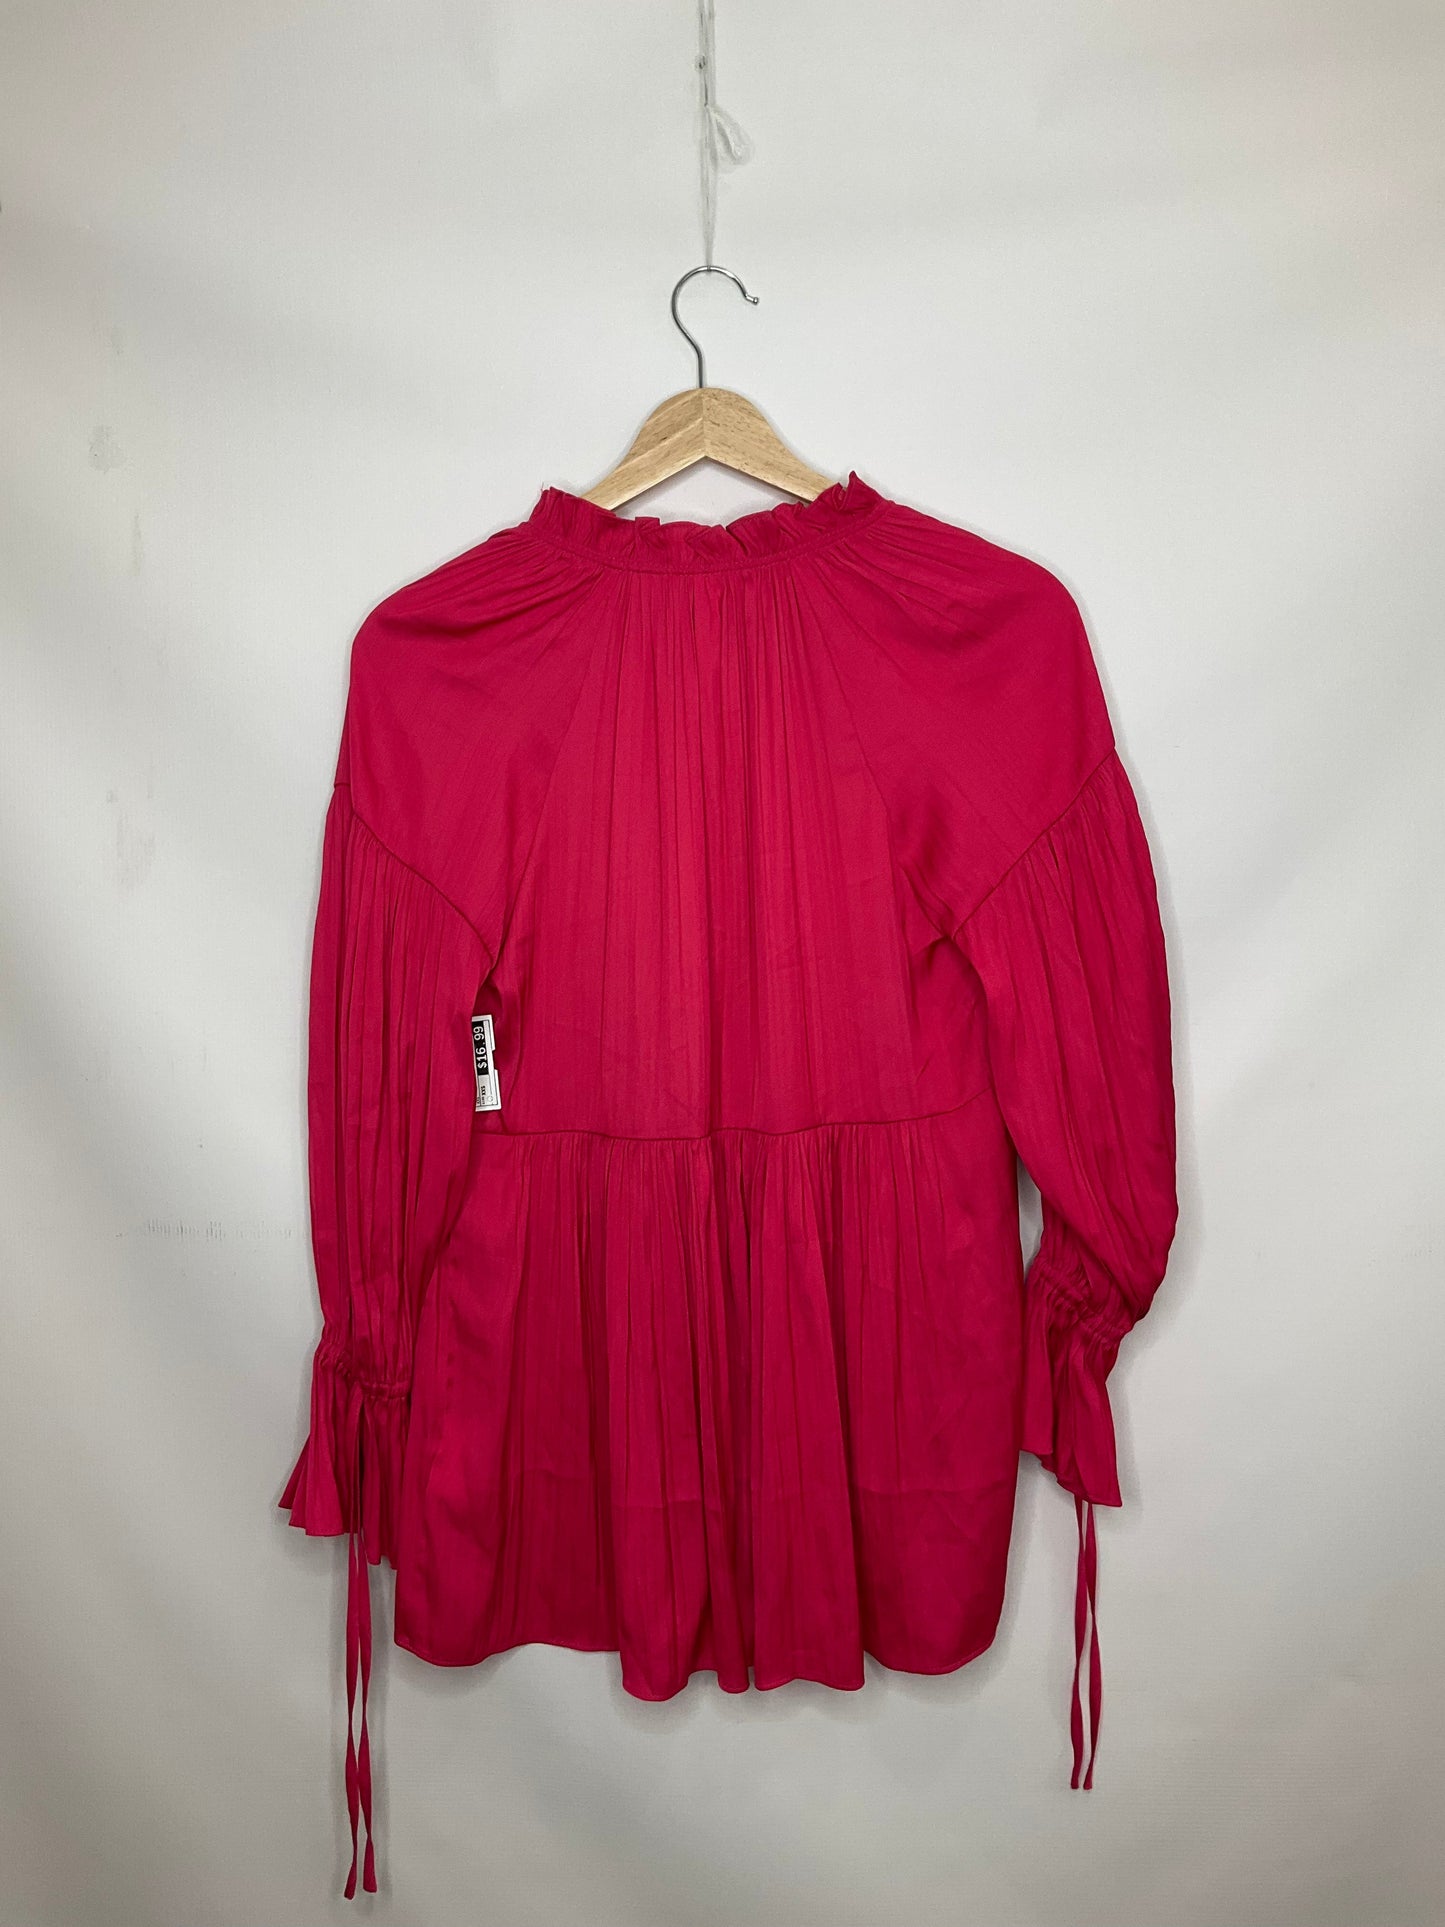 Hot Pink Blouse Long Sleeve Anthropologie, Size Xxs